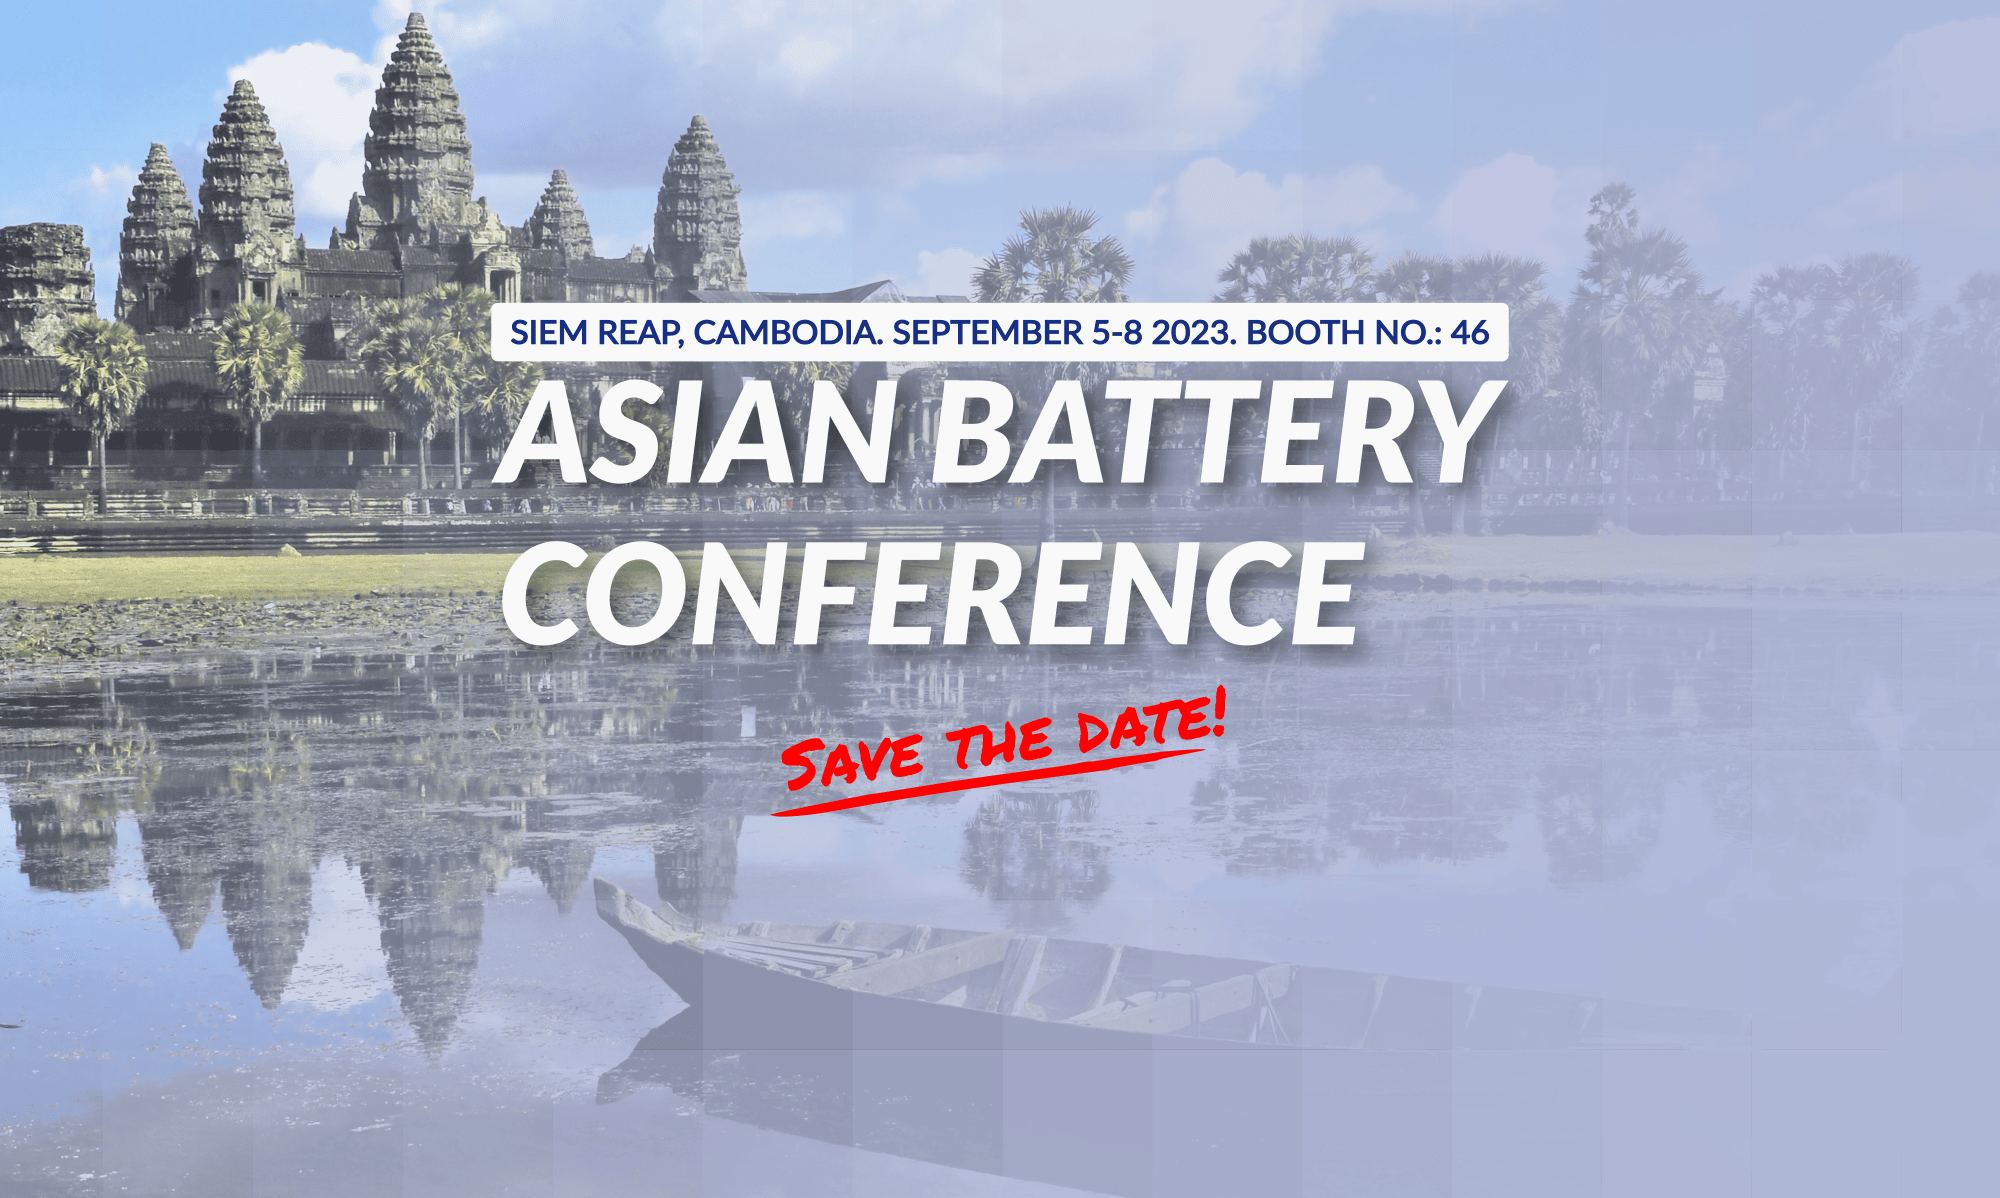 Don't miss the chance to meet BTS at next year's Asian Battery Conference!